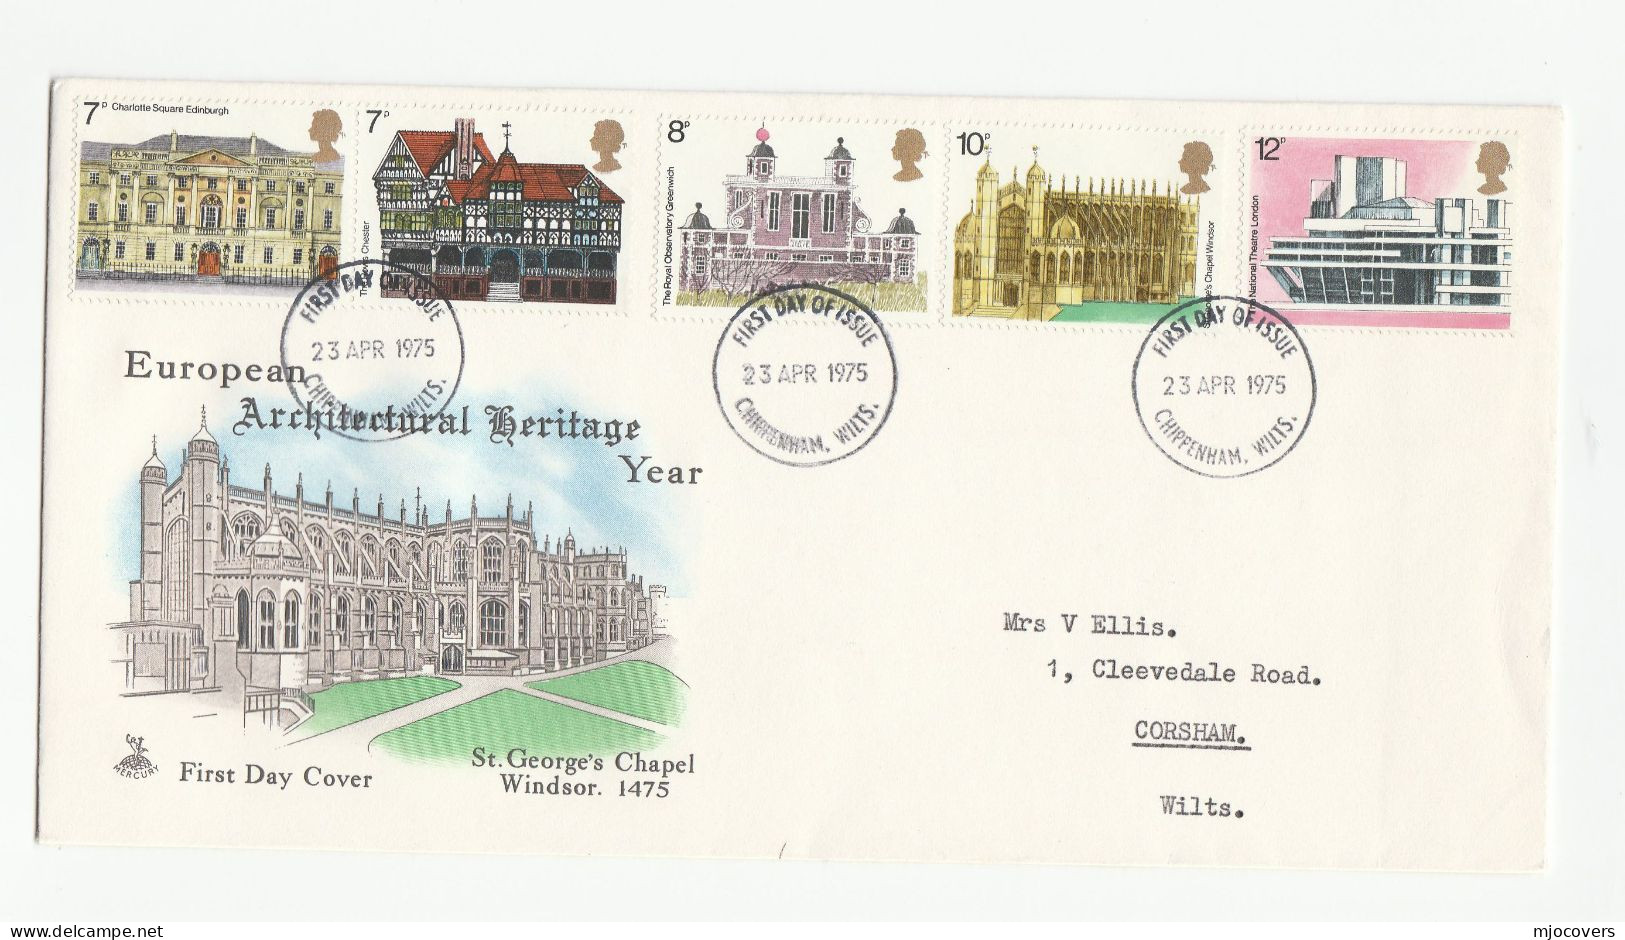 8 GB FDCs Chippenham 1974 - 1980 cover stamps fdc